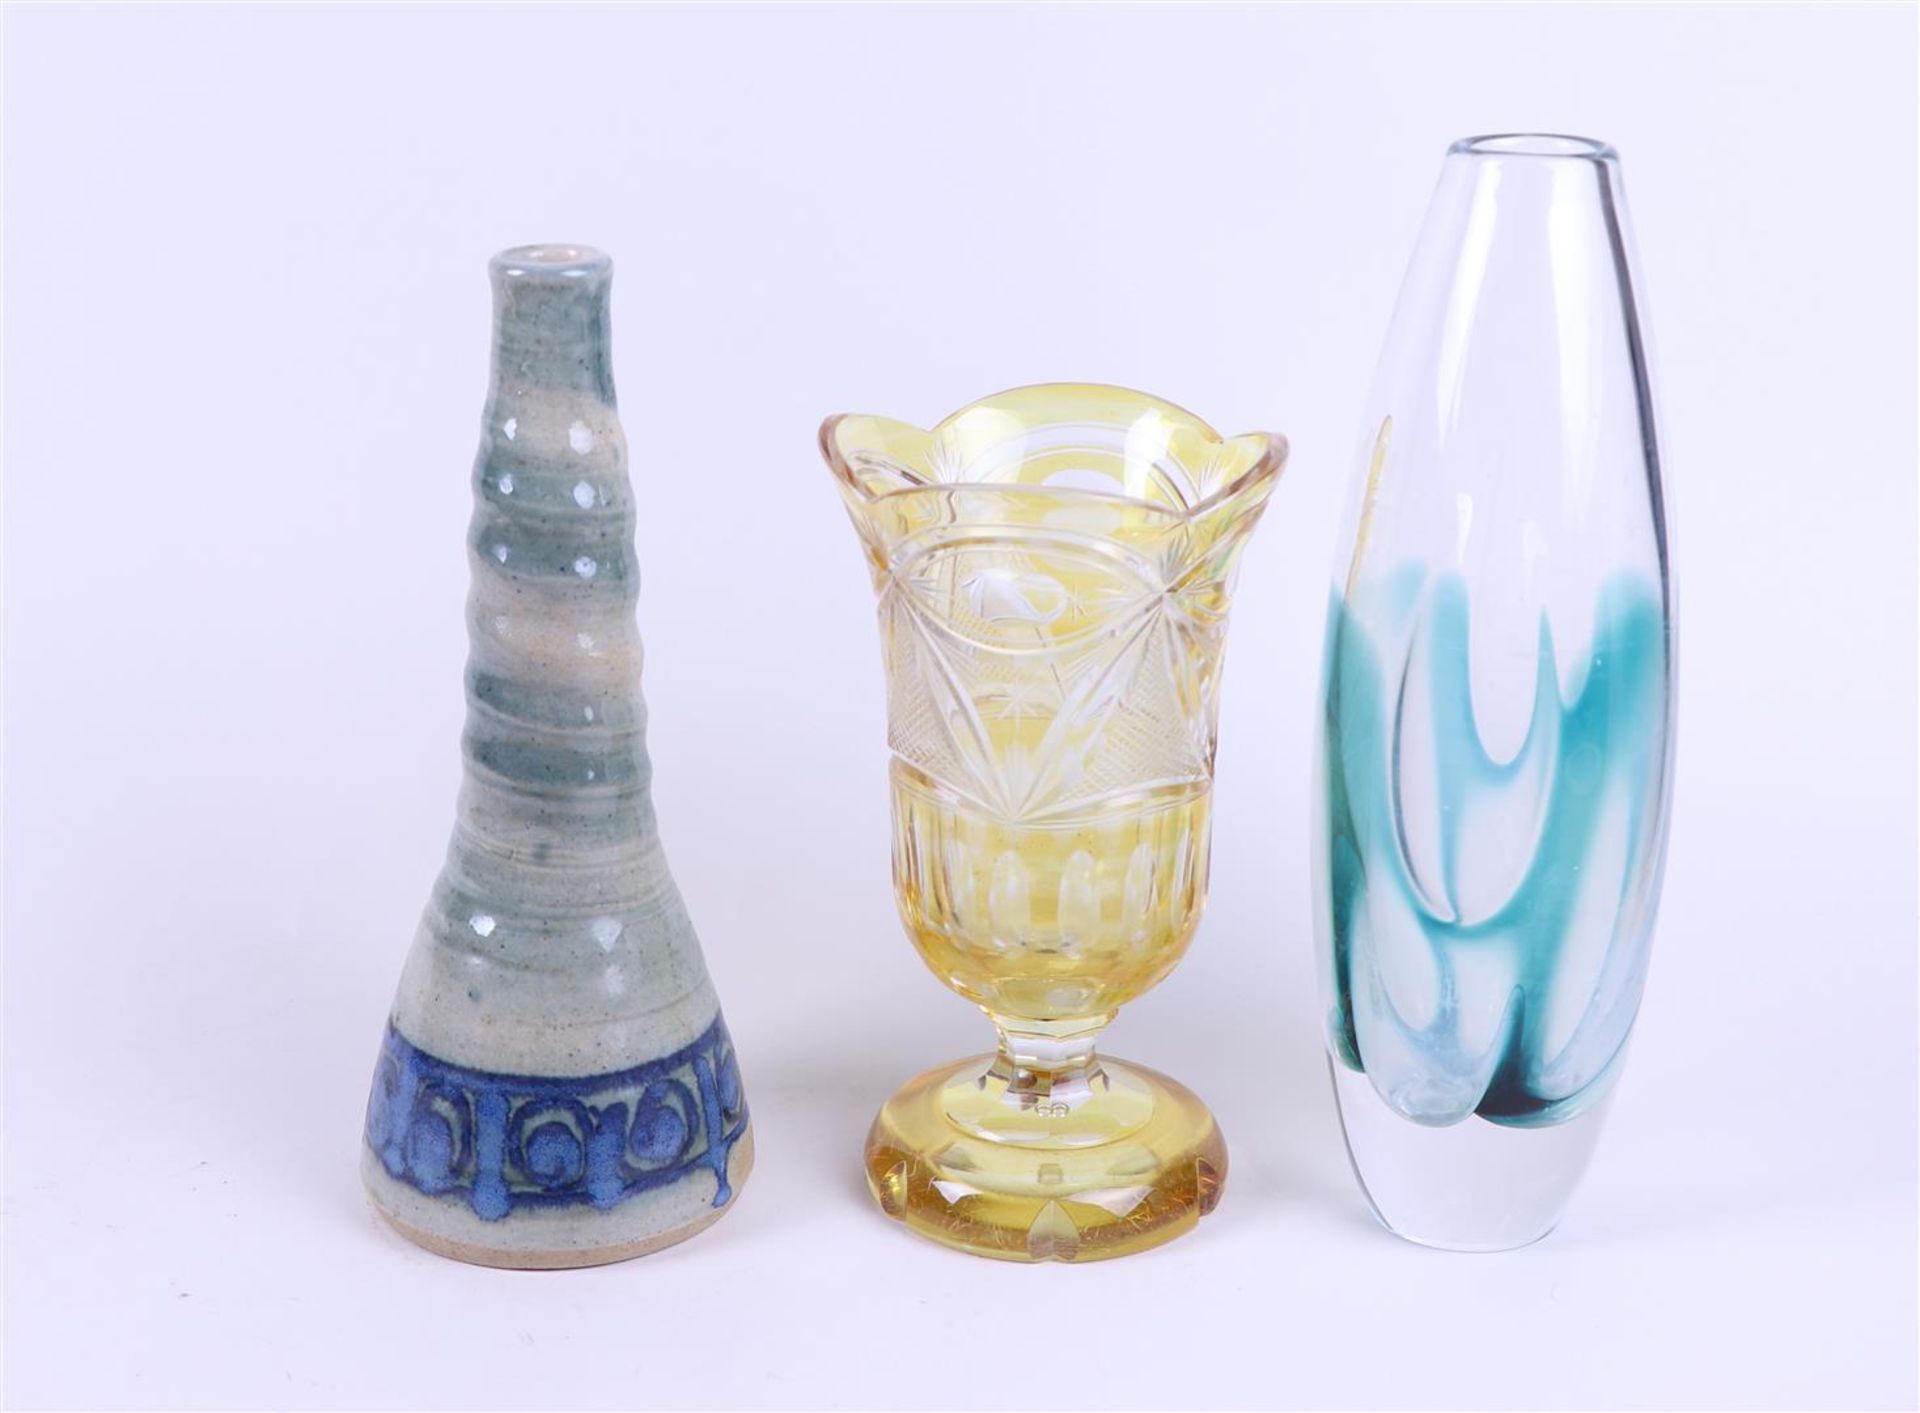 Lot of a Yellow "Bohemian" Goblet Vase, an Earthenware Vase, and a Glass Vase - Image 2 of 3